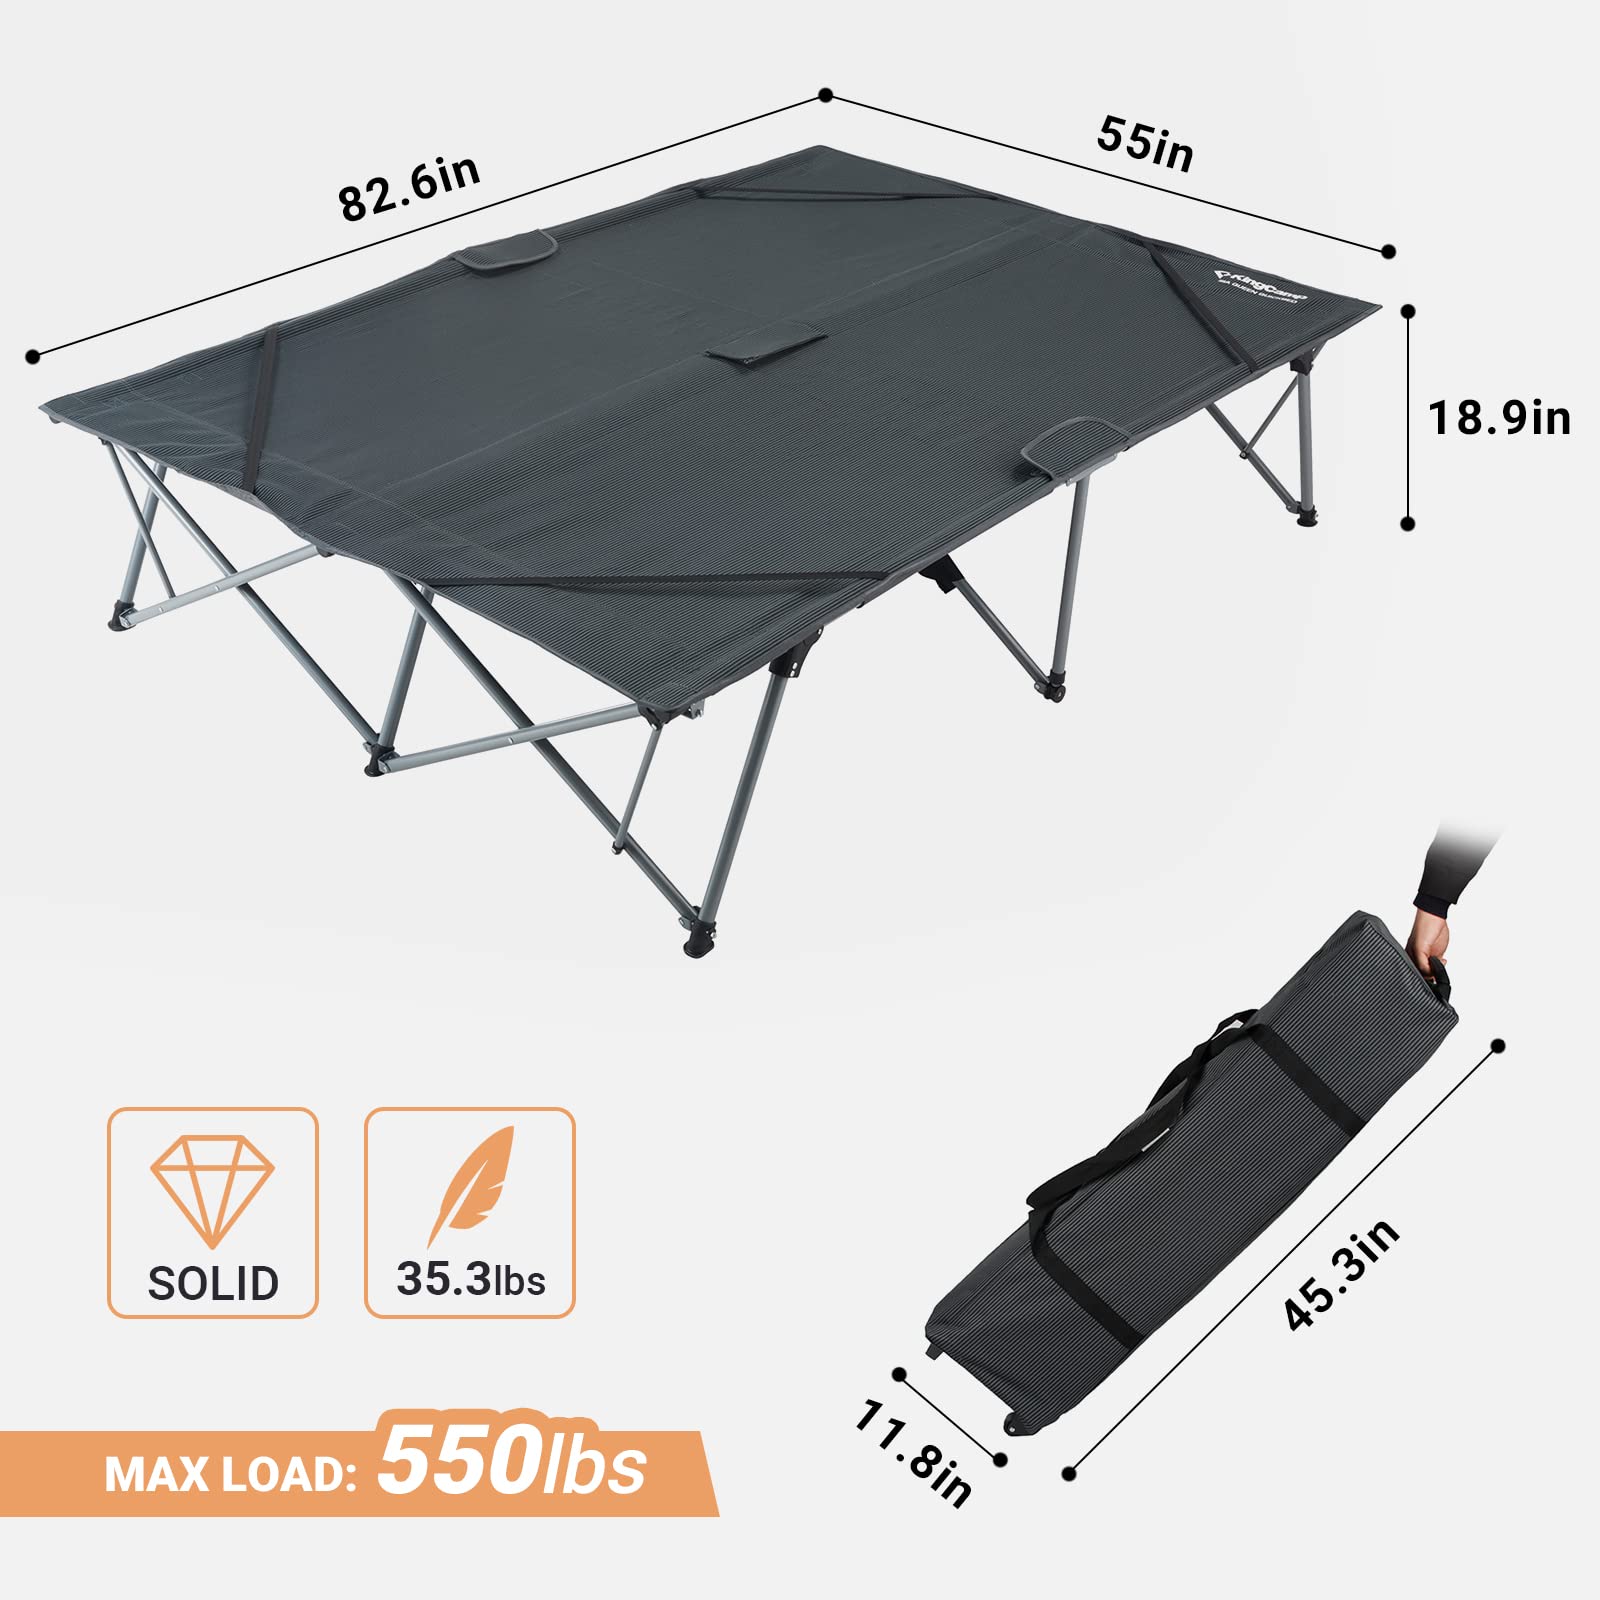 double camping cot